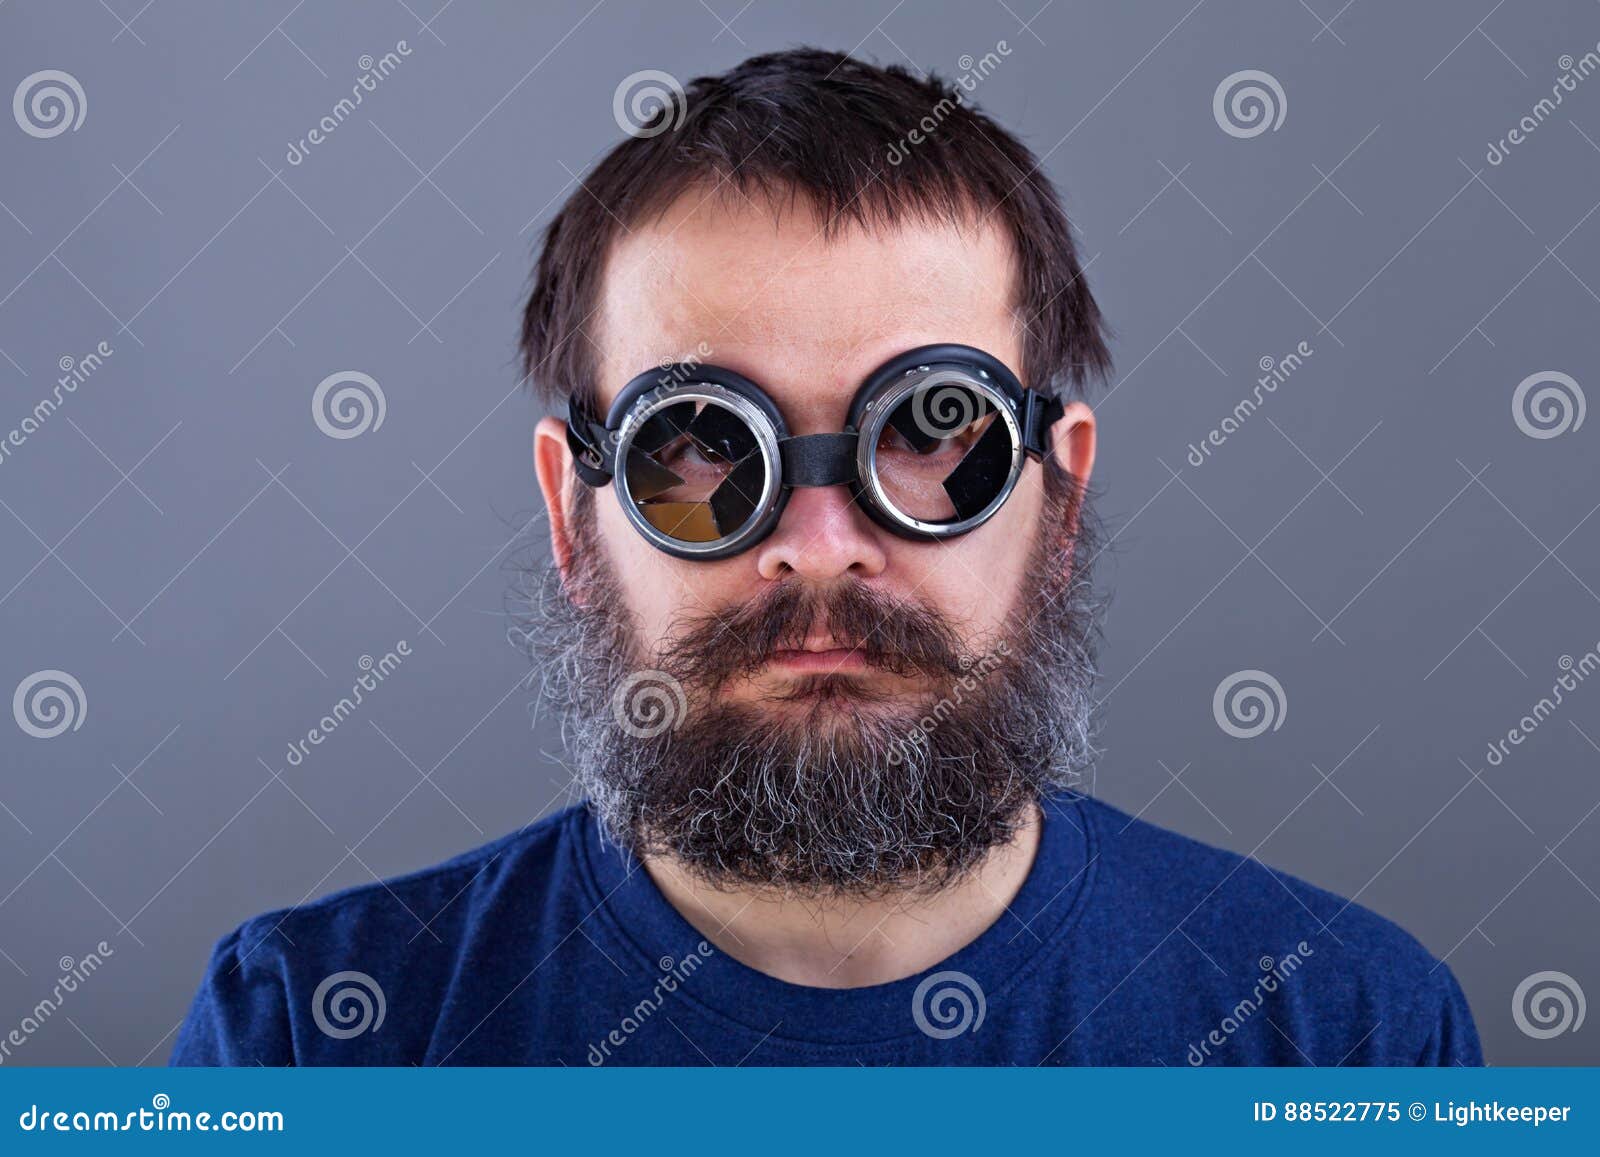 weird guy with matted hair and large beard wearing broken welding goggles